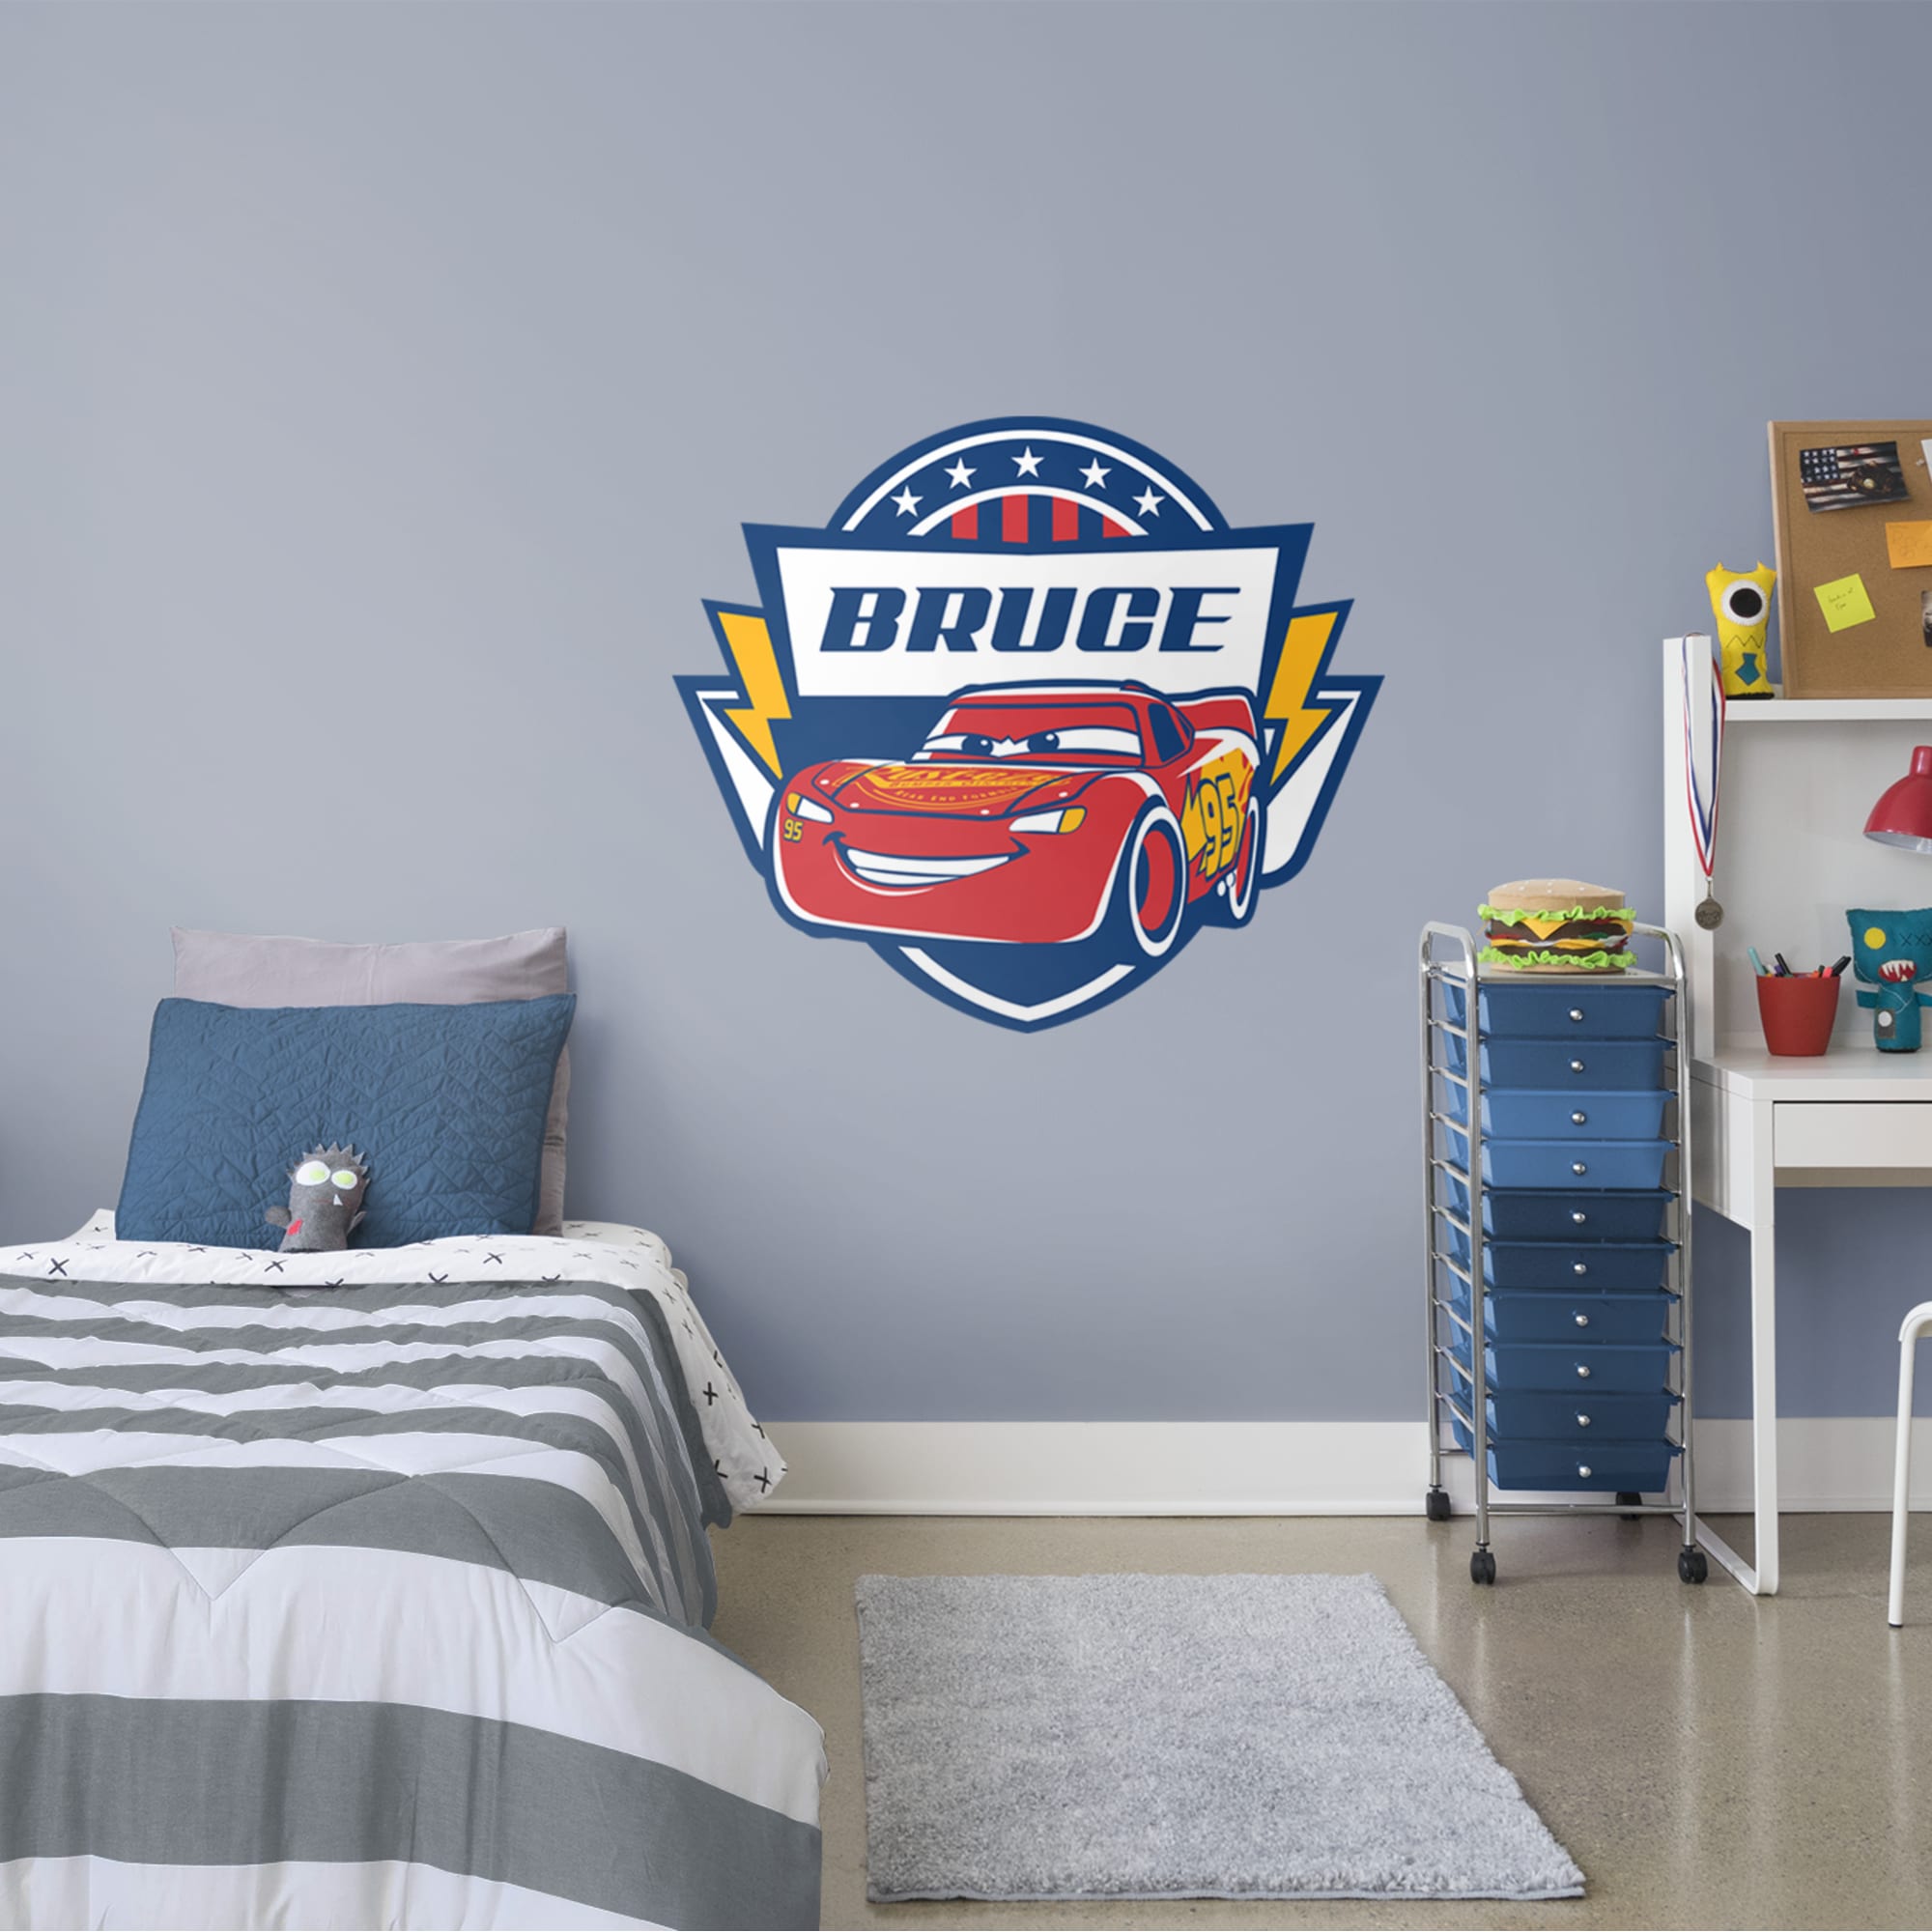 Cars 3: Personalized Name - Officially Licensed Disney/PIXAR Removable Wall Graphic 53.0"W x 38.0"H by Fathead | Vinyl